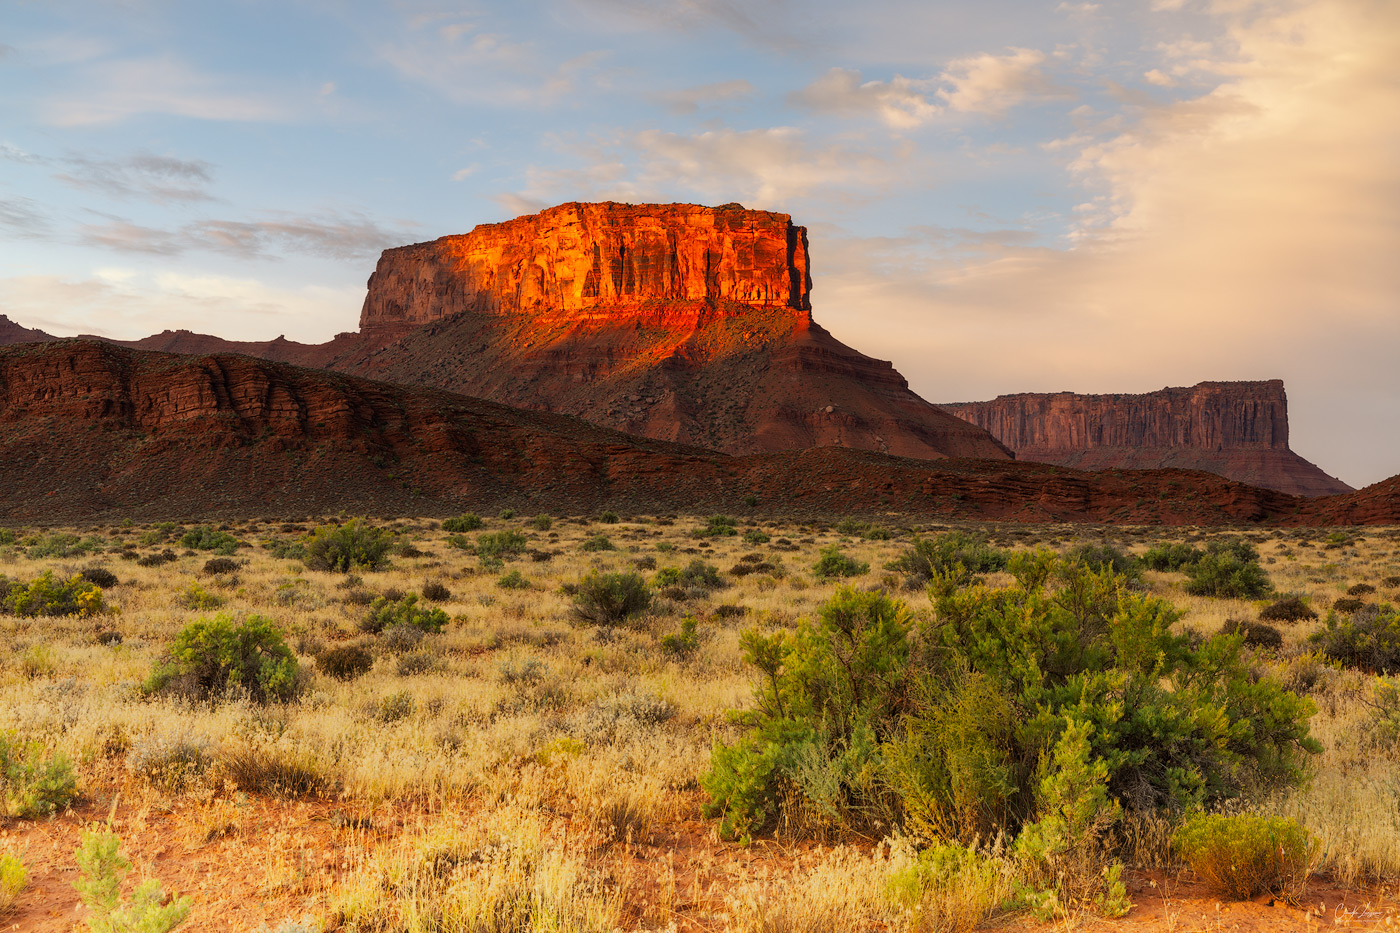 View of Red Rock Formations near Moab in Utah at sunrise.